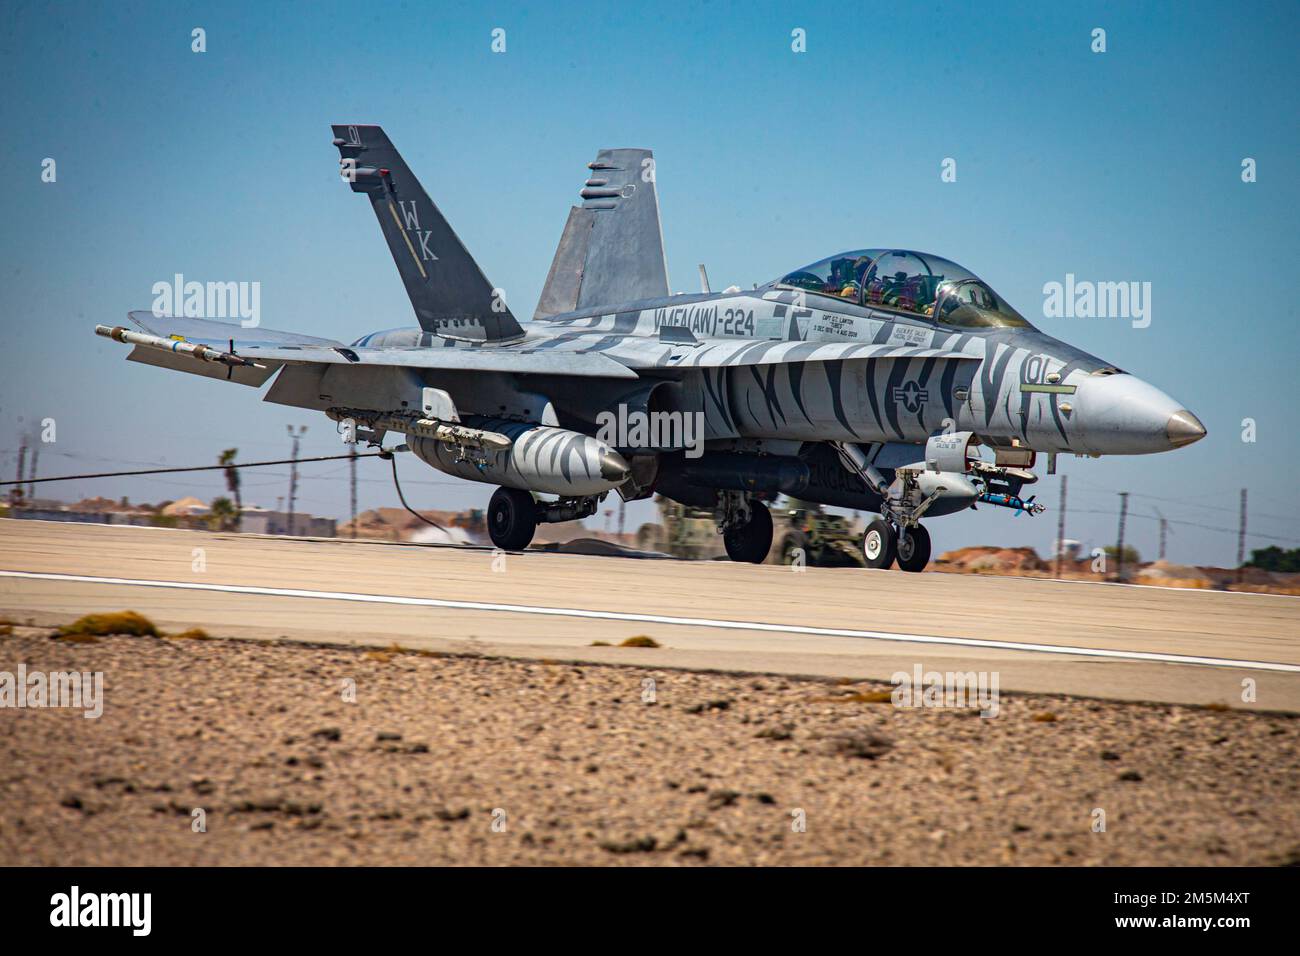 A U.S. Marine Corps F/A-18 Hornet latches onto an emergency arresting gear system, during an exercise as part of Weapons and Tactics Instructor (WTI) course 2-22, at Marine Corps Air Station Yuma, Arizona, March 24, 2022. WTI is a seven-week training event hosted by MAWTS-1, providing standardized advanced tactical training and certification of unit instructor qualifications to support Marine aviation training and readiness, and assists in developing and employing aviation weapons and tactics. Stock Photo